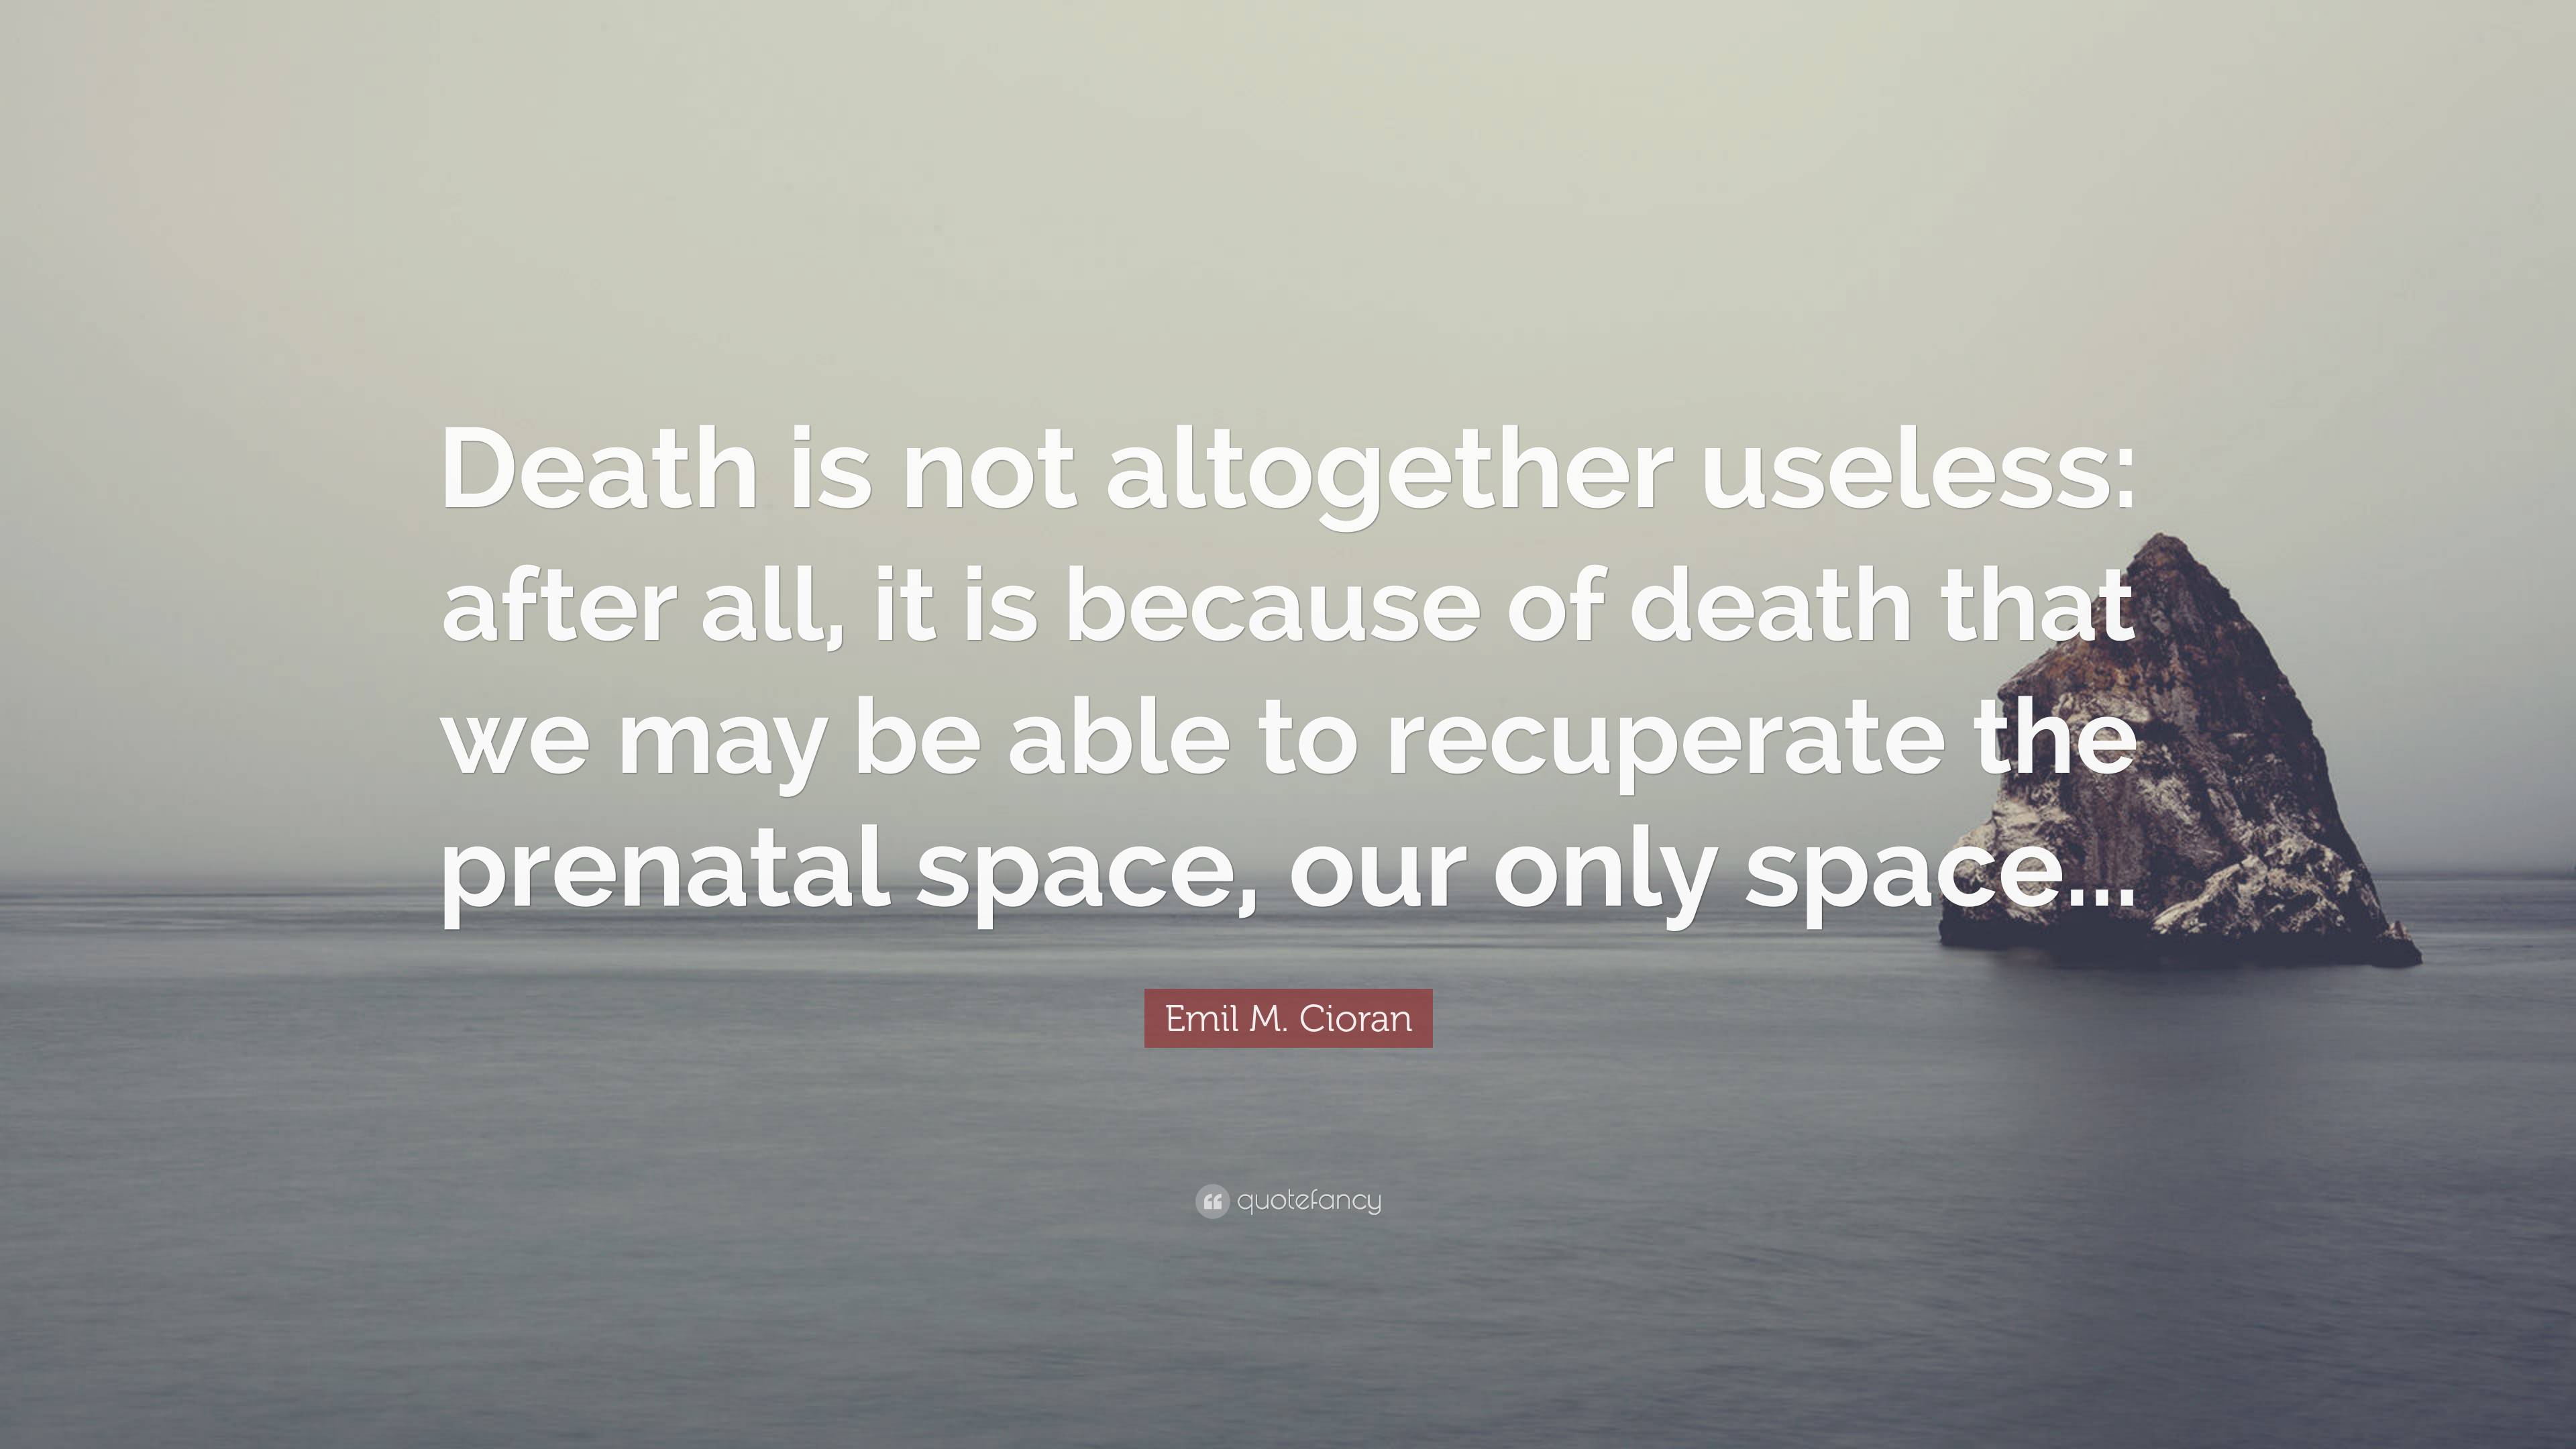 Emil M. Cioran Quote: “Death is not altogether useless: after all, it ...